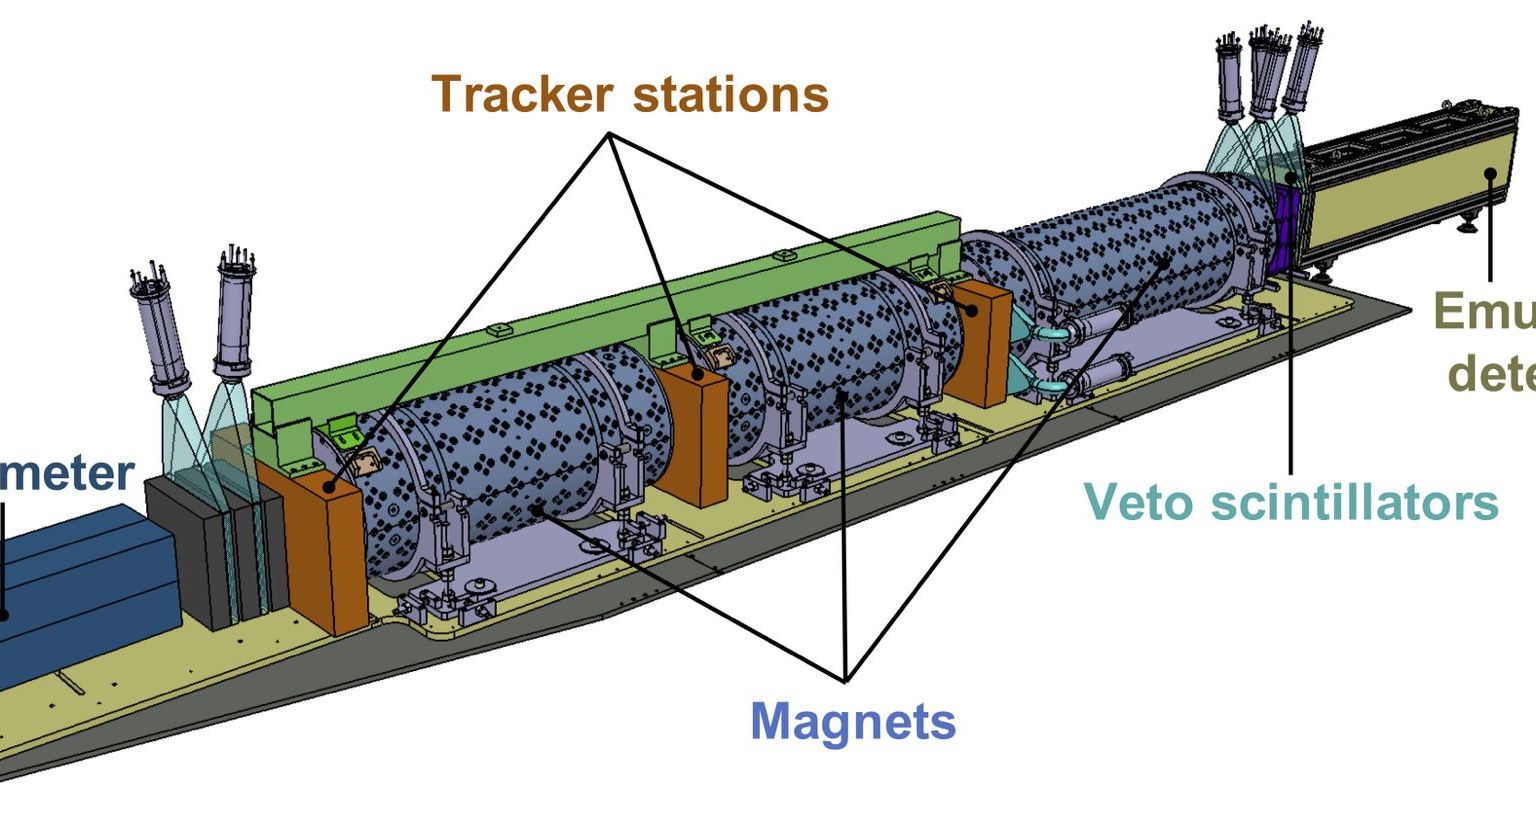 Starting from the neighbouring ATLAS experiment, high-energy particles (100 GeV to several TeV) hit the FASER detector from the right. Four “veto” scintillators eliminate the muons contained in the particle beam, as they are of no interest to the FASER experiment. When particles subsequently decay in the 'decay volume', the decay products can then be detected in the three tracking stations of the spectrometer. Each tracking station consists of three silicon layers for the detection of charged particles. Uncharged particles (e.g. photons) are detected by the calorimeter at the end of the detector. The trajectories of the decay products  and their properties can be reconstructed from the measured data. The emulsion detector (FASERν) at the front of the detector will measure interactions of high energy collider neutrinos. In contrast to the FASER experiment’s main agenda — detecting new particles — FASERν aims to provide cross-section measurements of neutrinos. Neutrinos are described in the Standard Model of article physics but many of the properties are not yet understood.